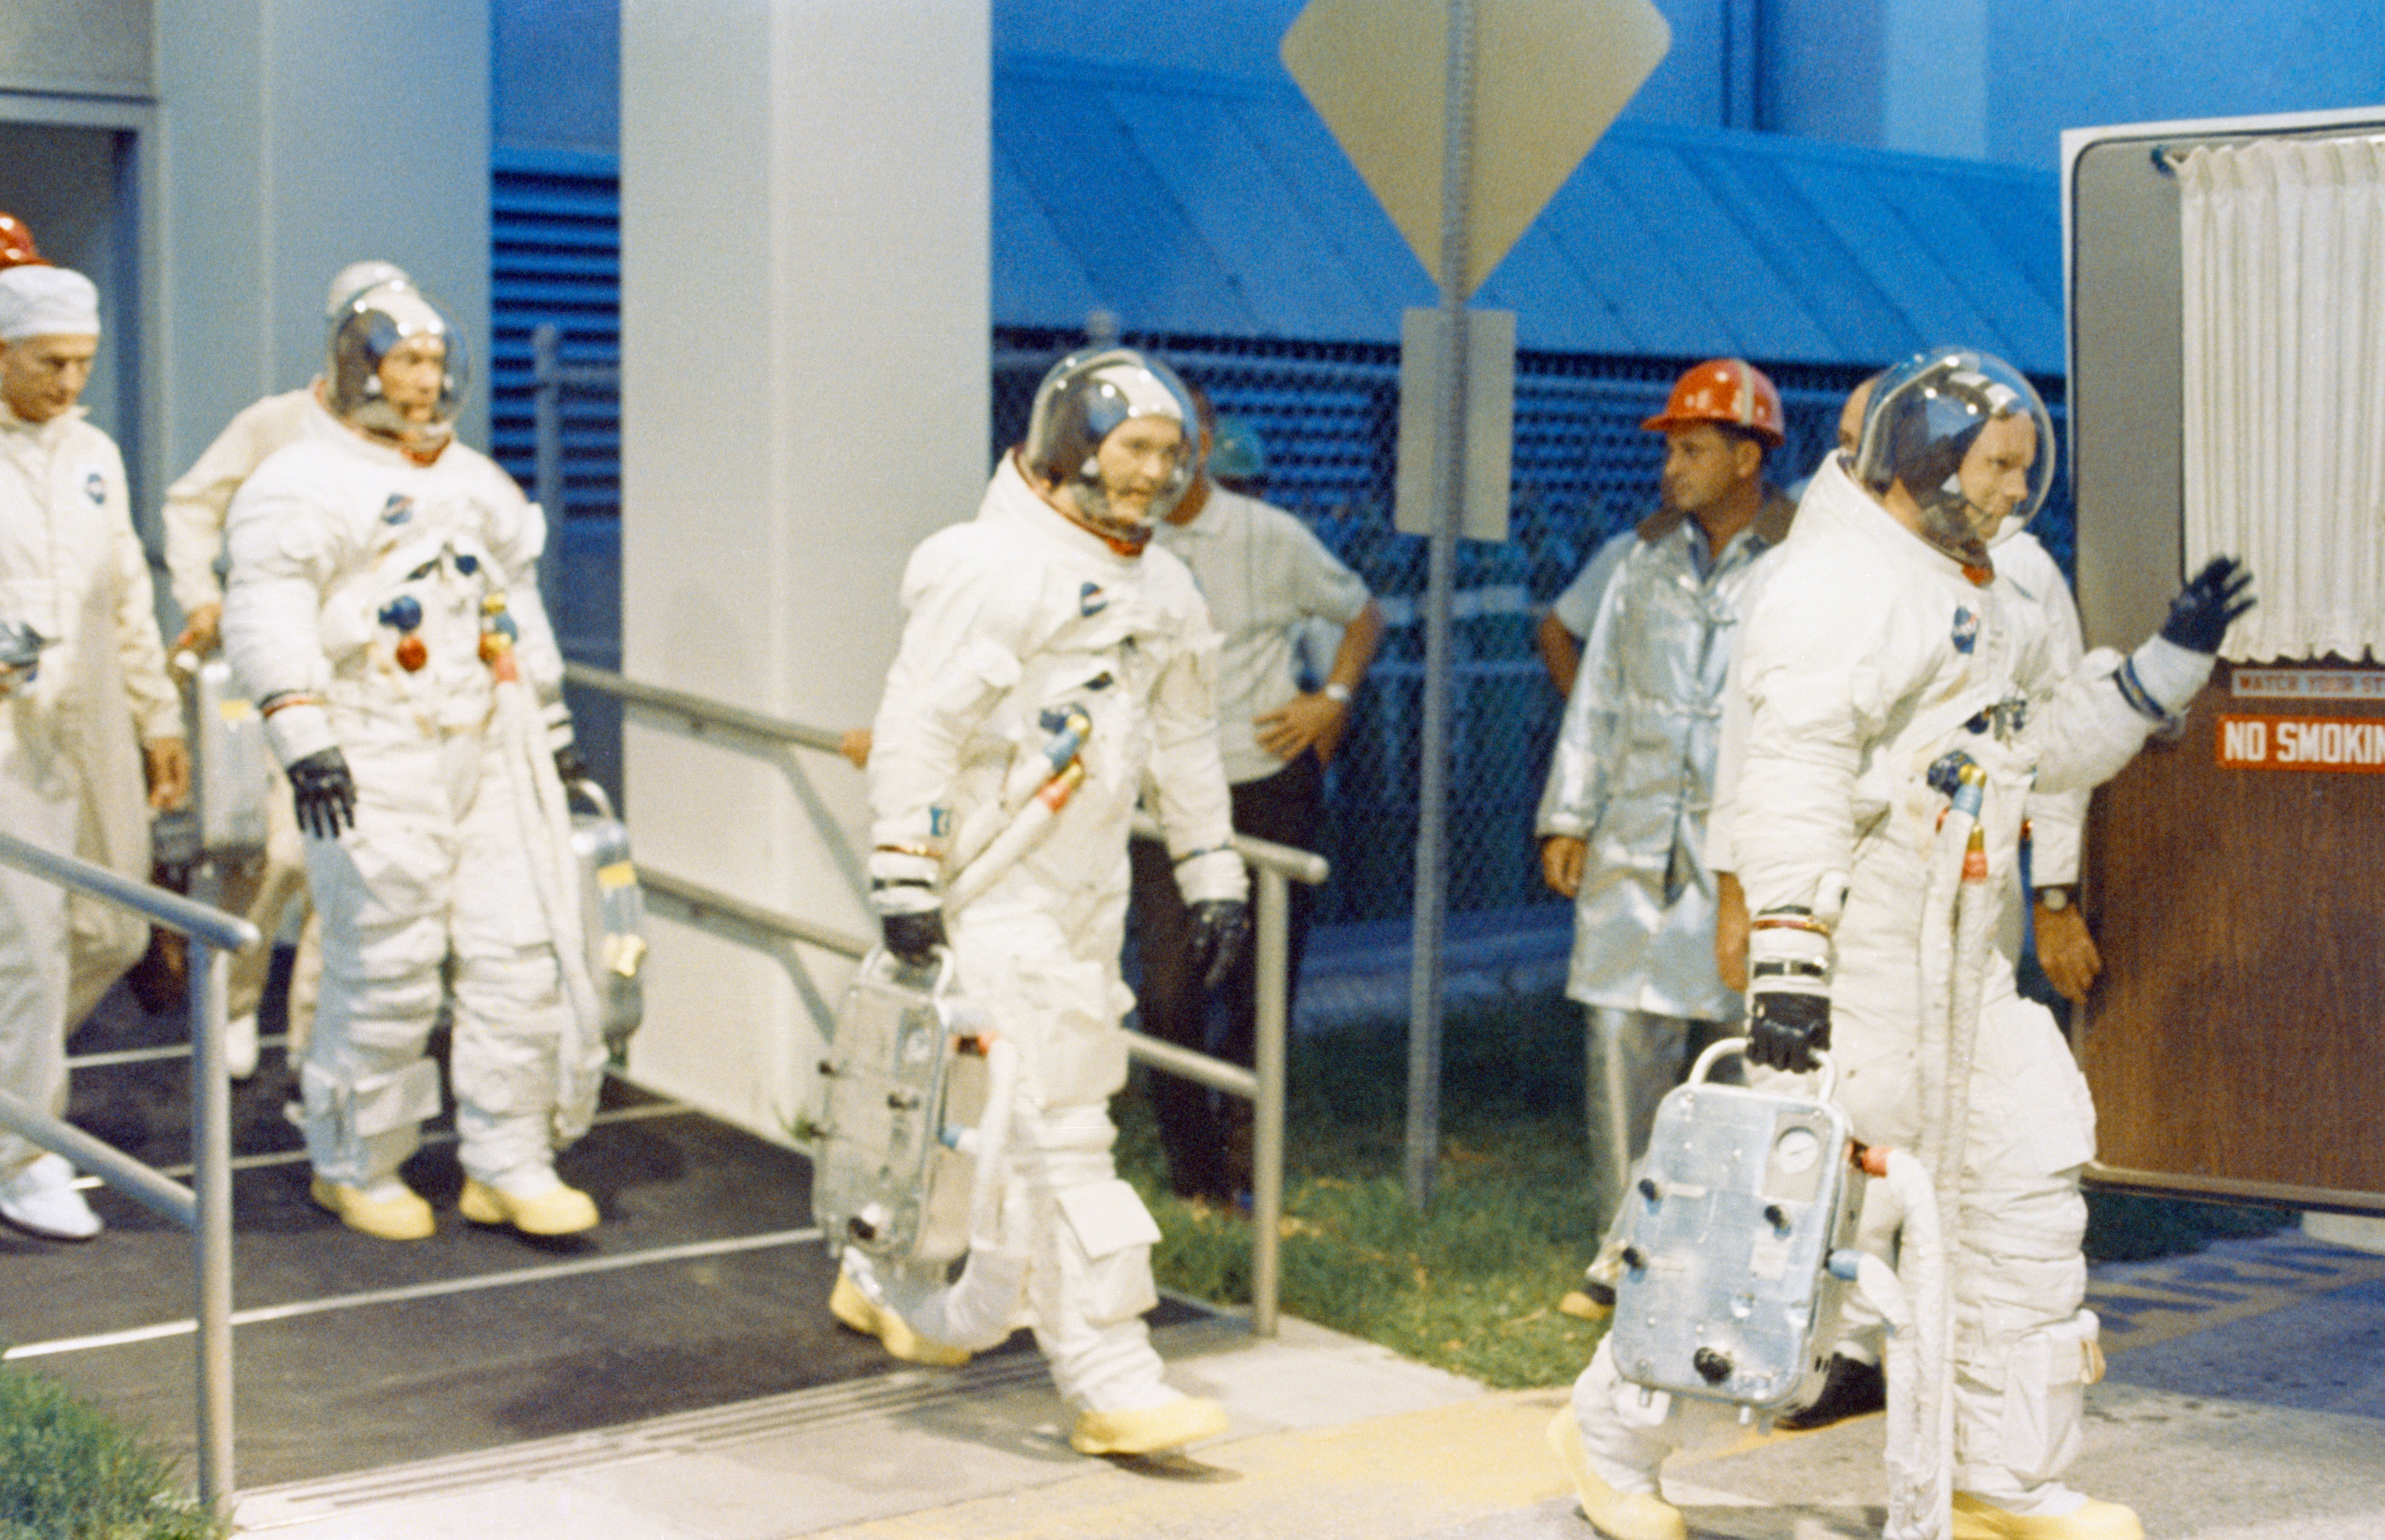 Apollo 11 astronauts Neil A. Armstrong, front, Michael Collins, and Edwin E. “Buzz” Aldrin about to board the transfer van to Launch Pad 39A for the Countdown Demonstration Test (CDDT)